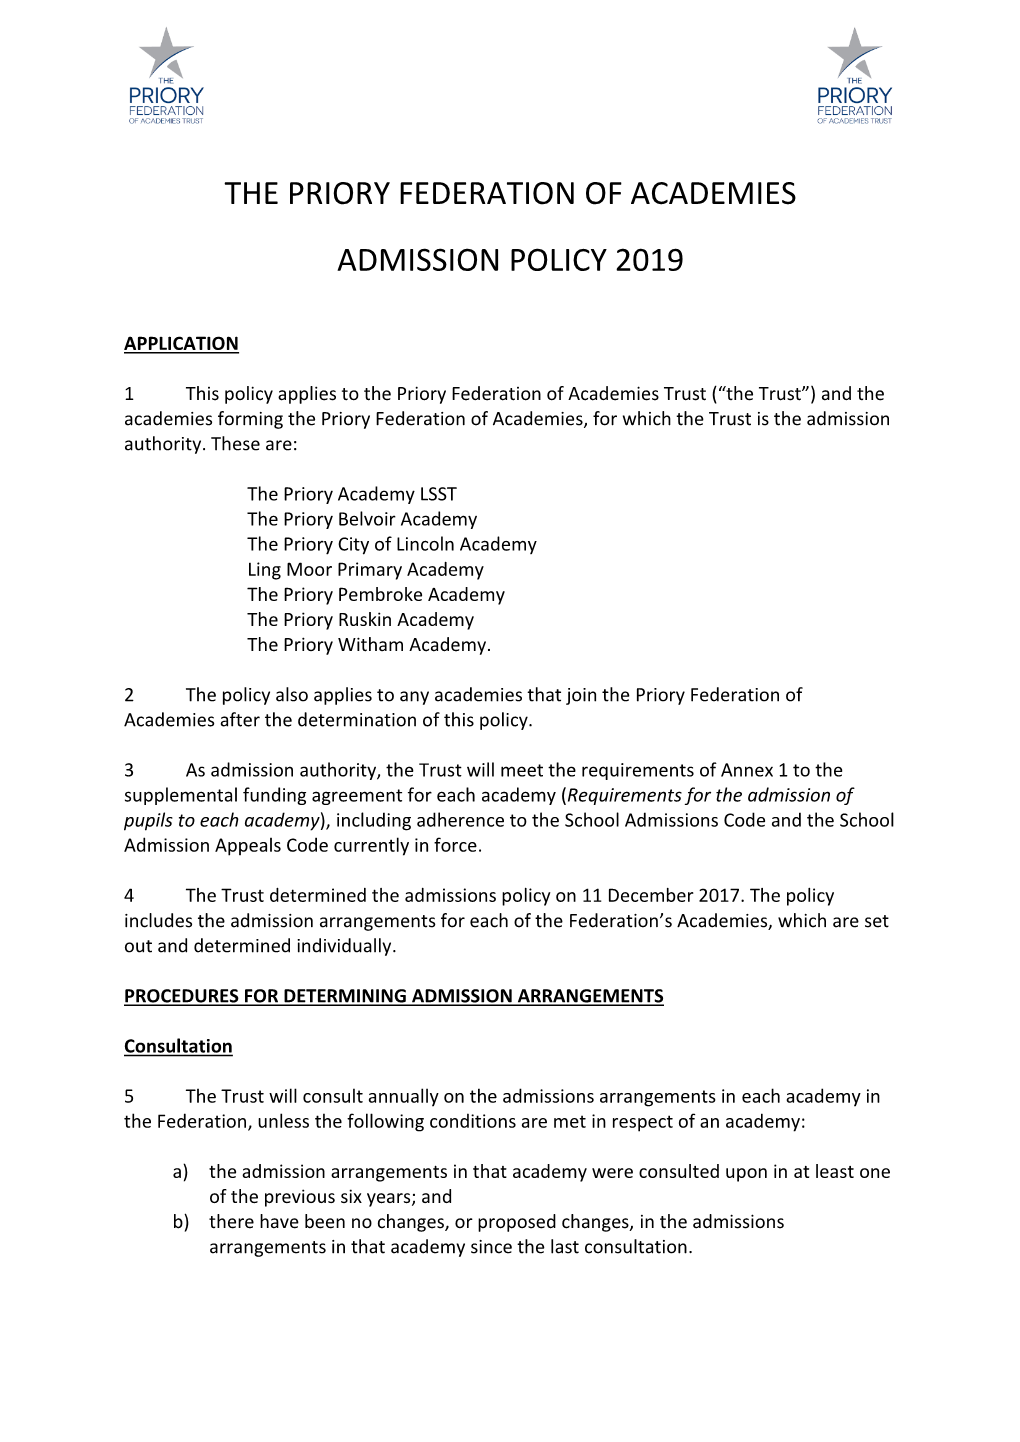 The Priory Federation of Academies Admission Policy